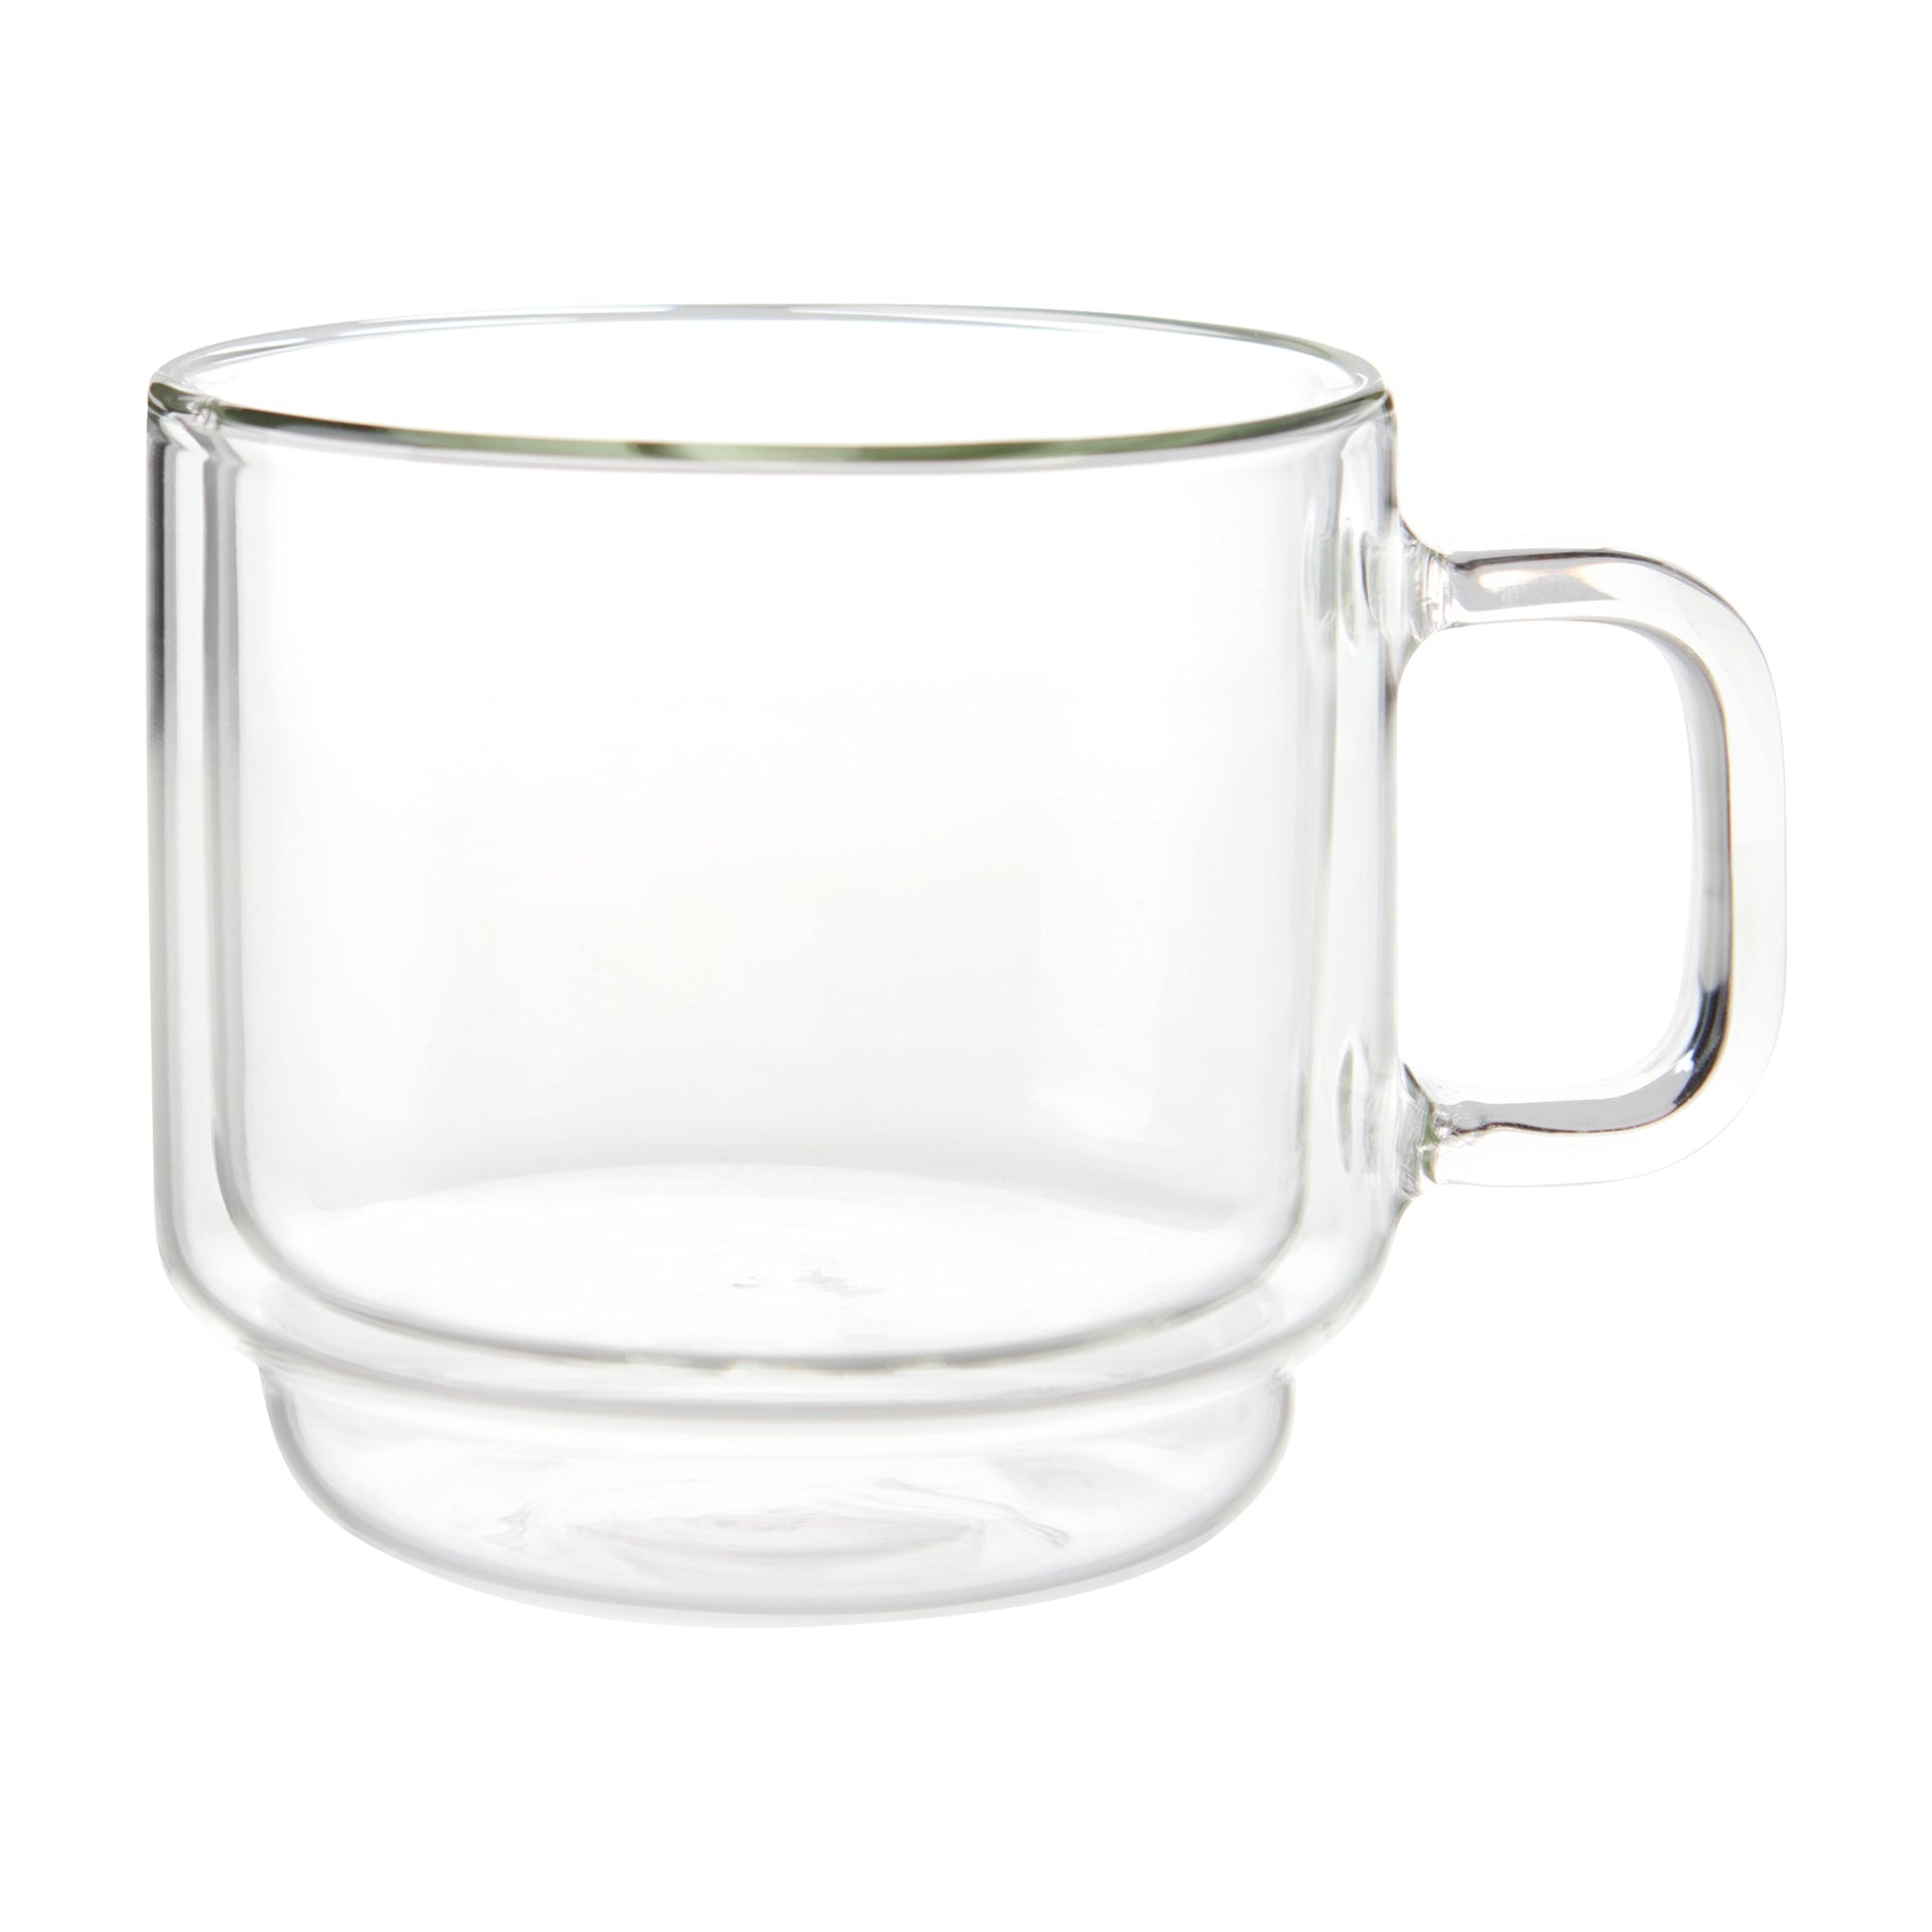 Insulated Double-Wall Glass Coffee Tea Hot or Cold Beverage Mug 2 Piece Set 350ml, Barista